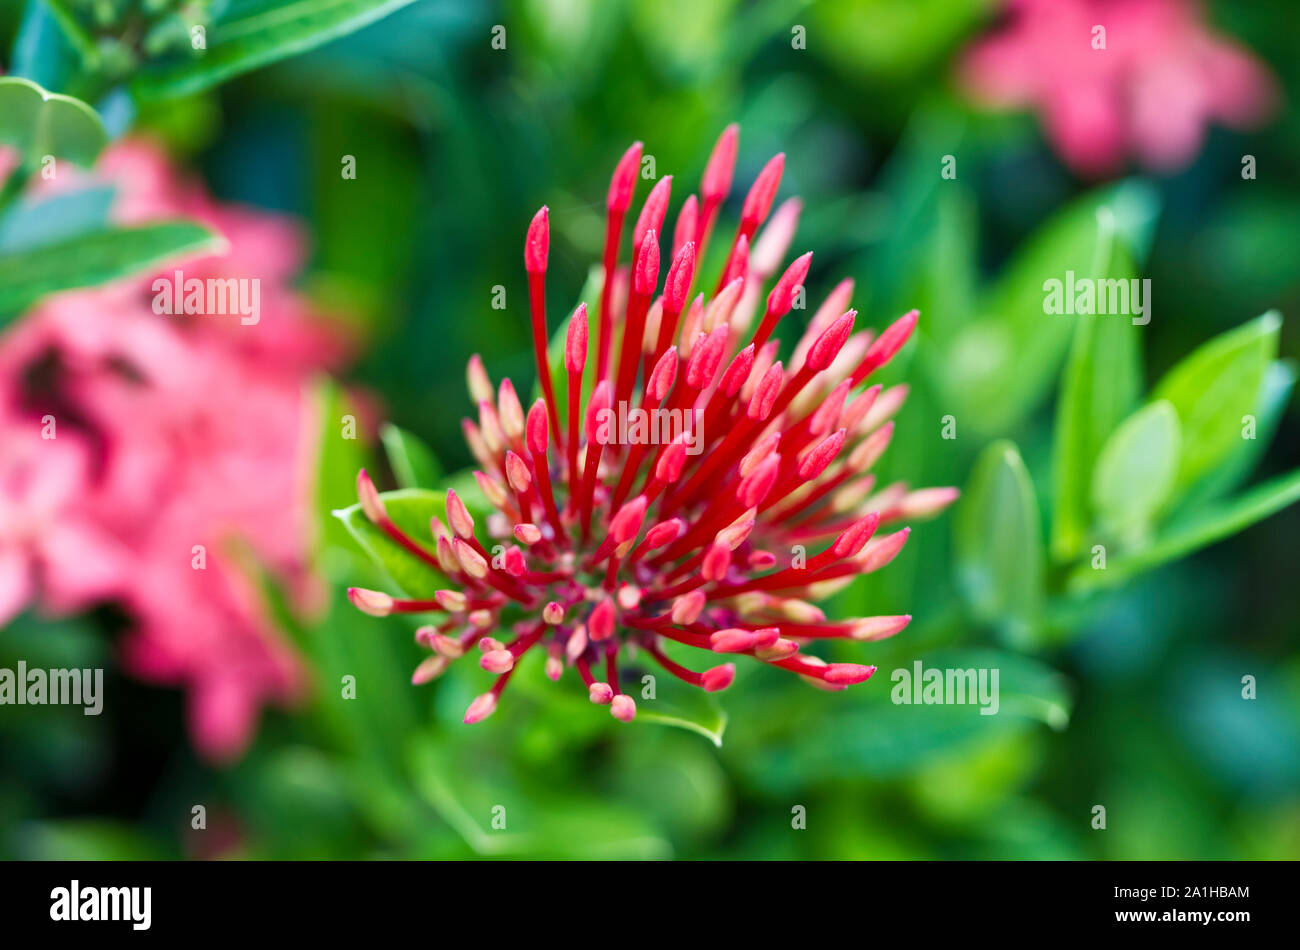 Red Ixora flower buds in the morning light with green blurry background Stock Photo